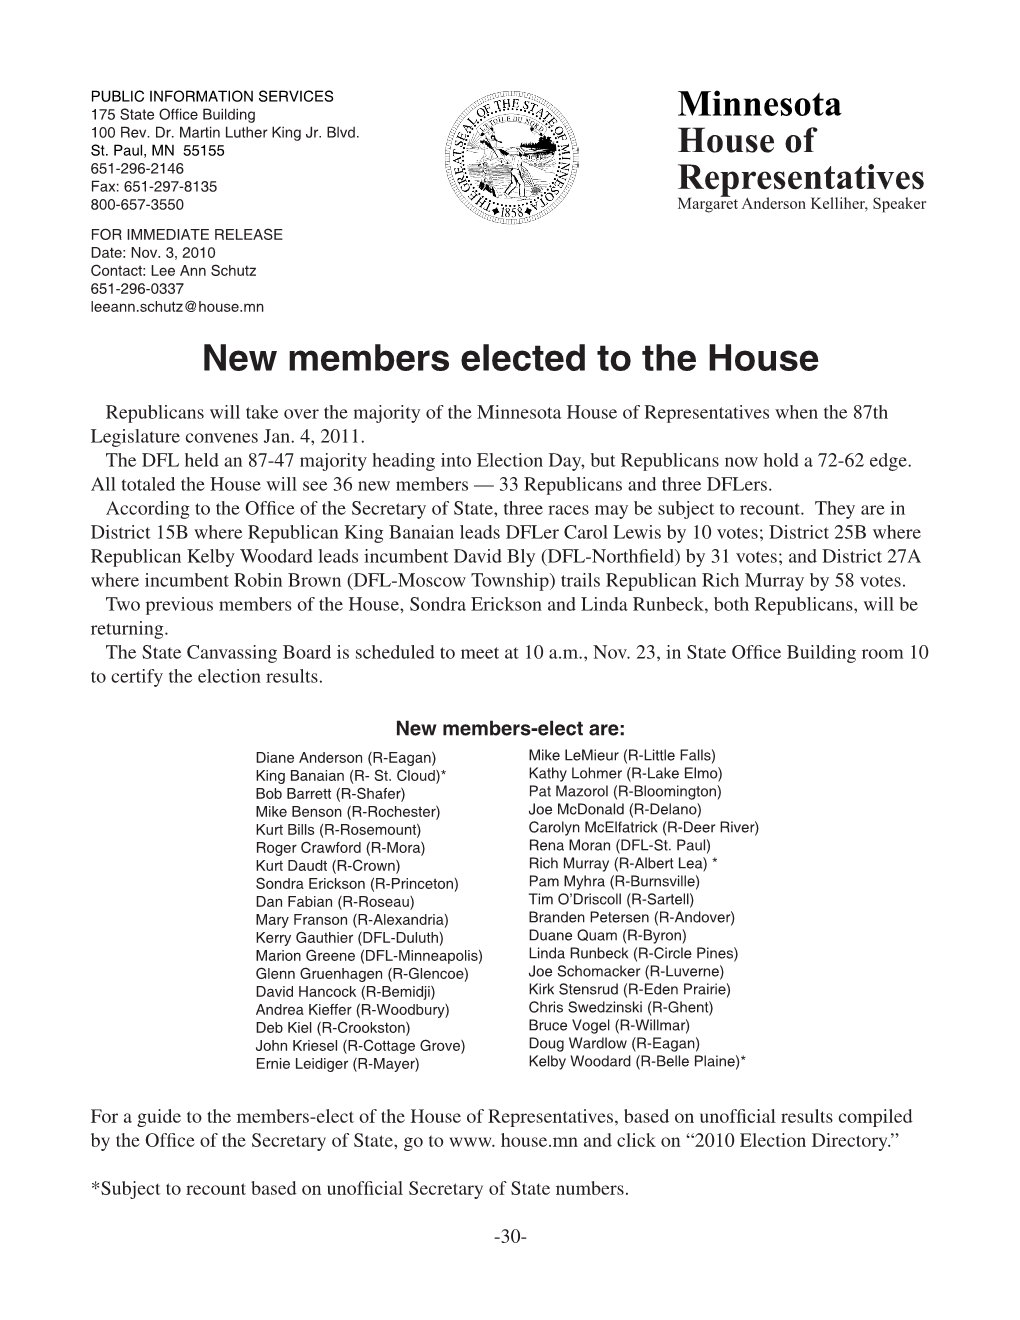 Minnesota House of Representatives New Members Elected to the House